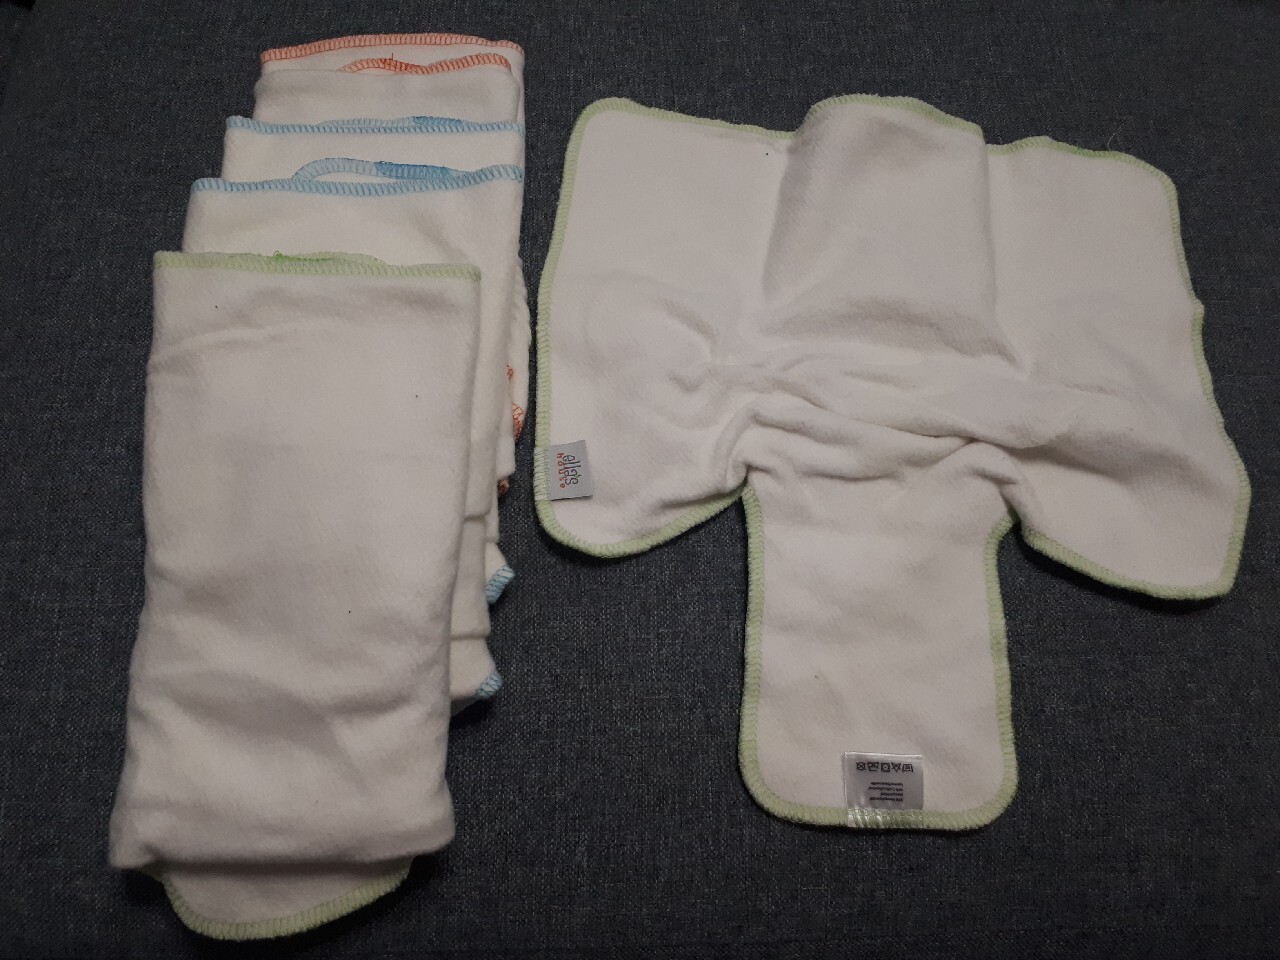 pampersy pampers 2 do 5